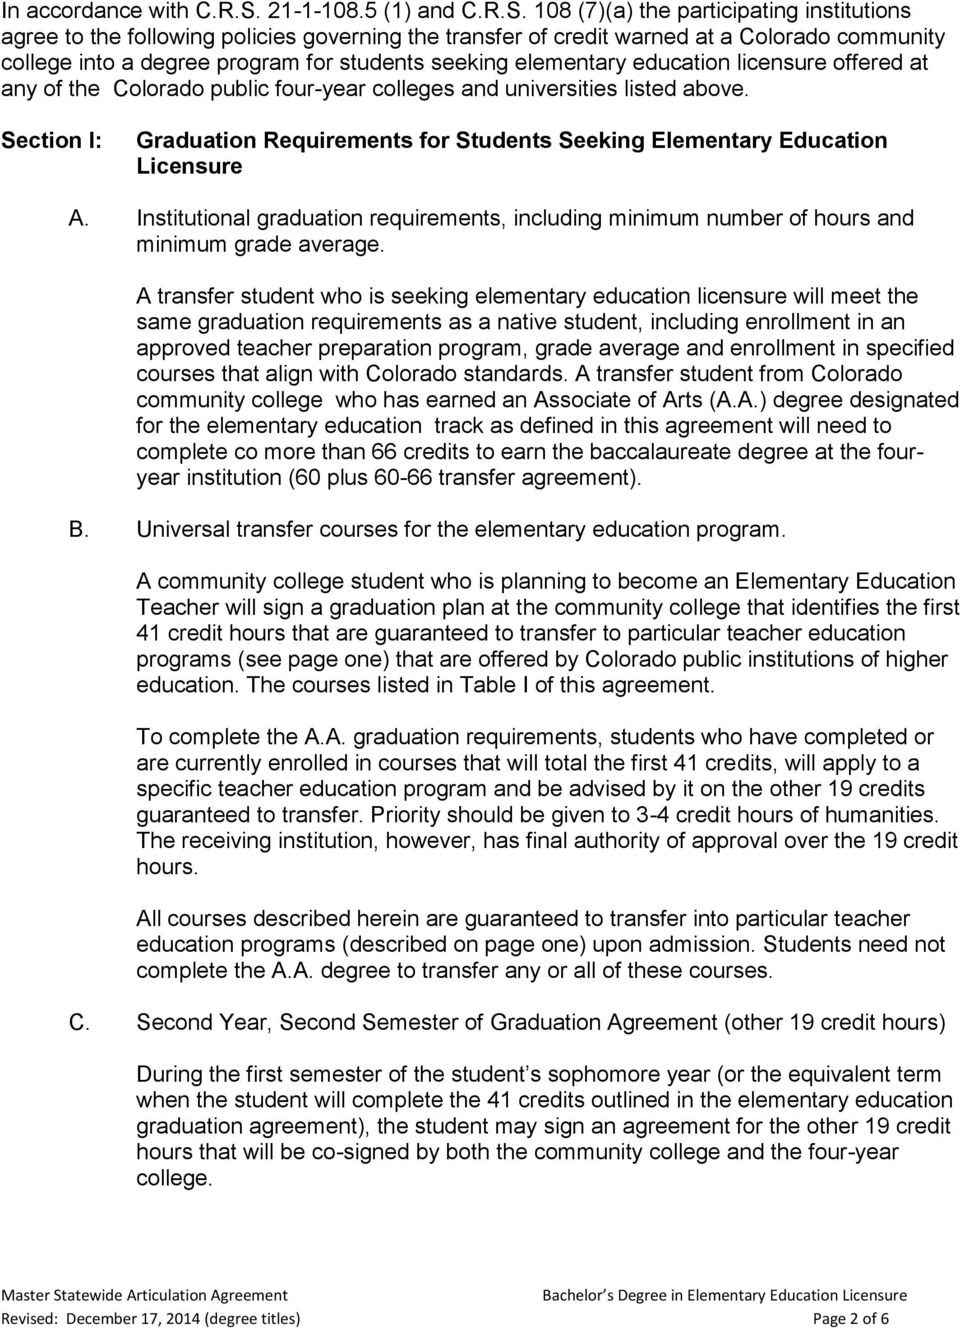 108 (7)(a) the participating institutions agree to the following policies governing the transfer of credit warned at a Colado community college into a degree program f students seeking elementary